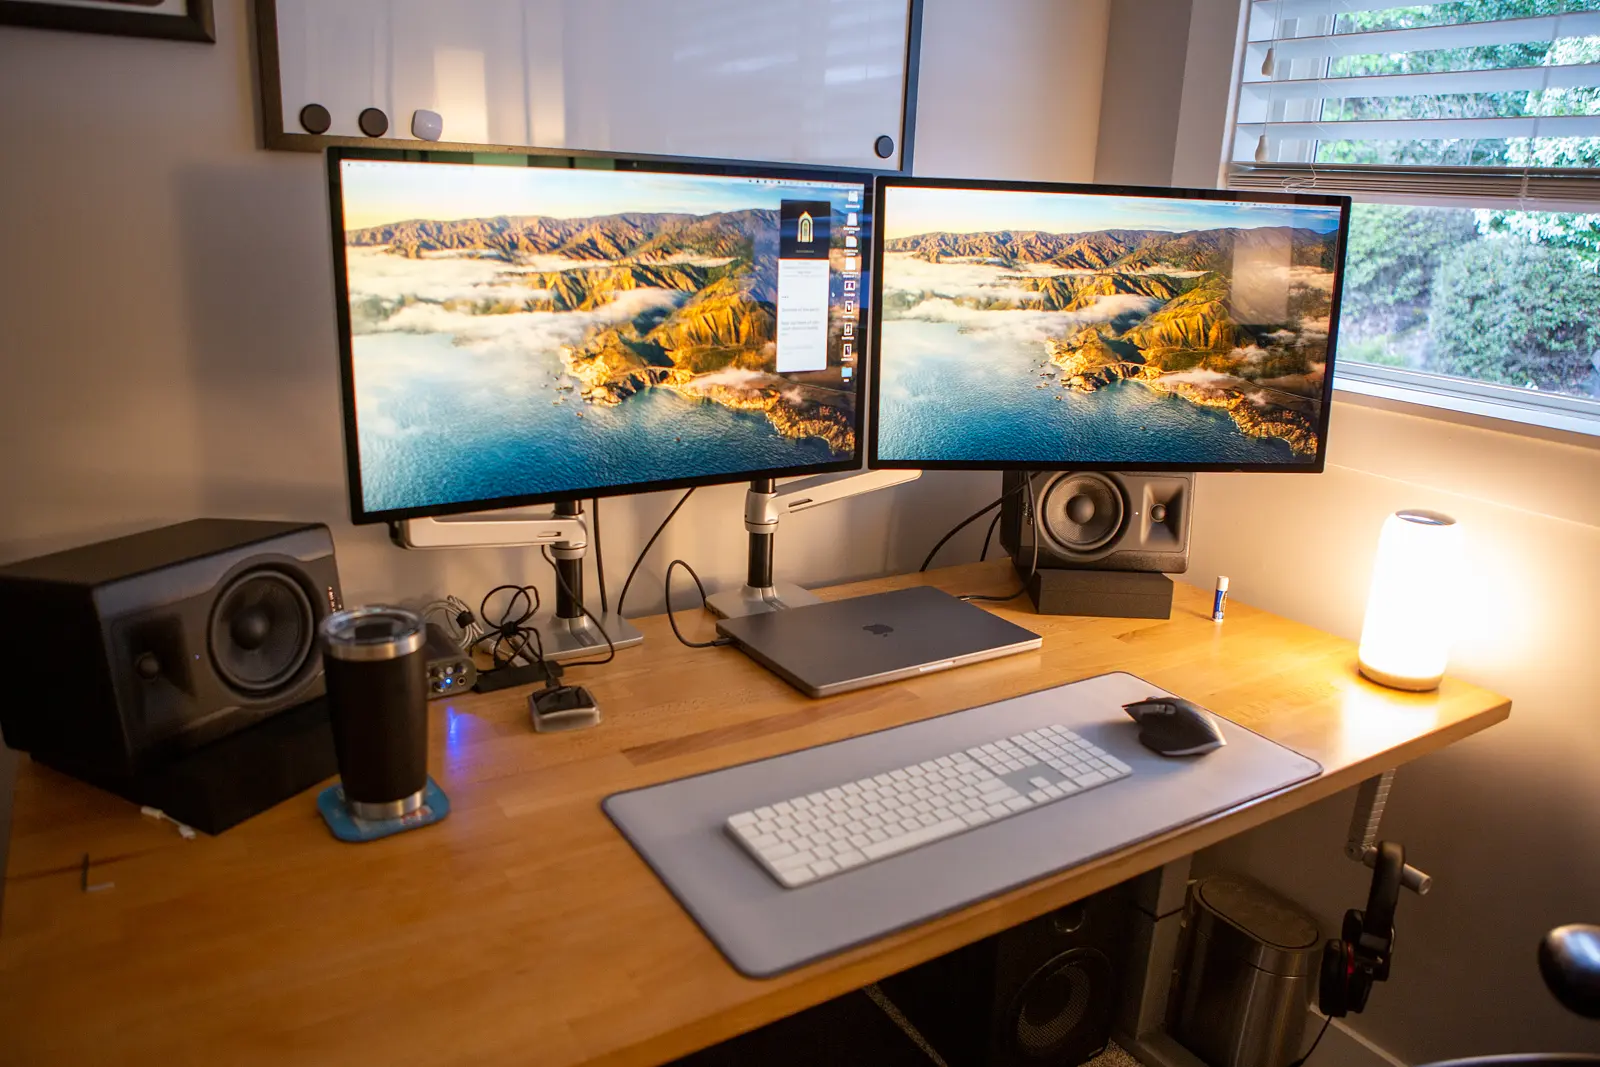 2 Studio Displays mounted to a wooden desk.